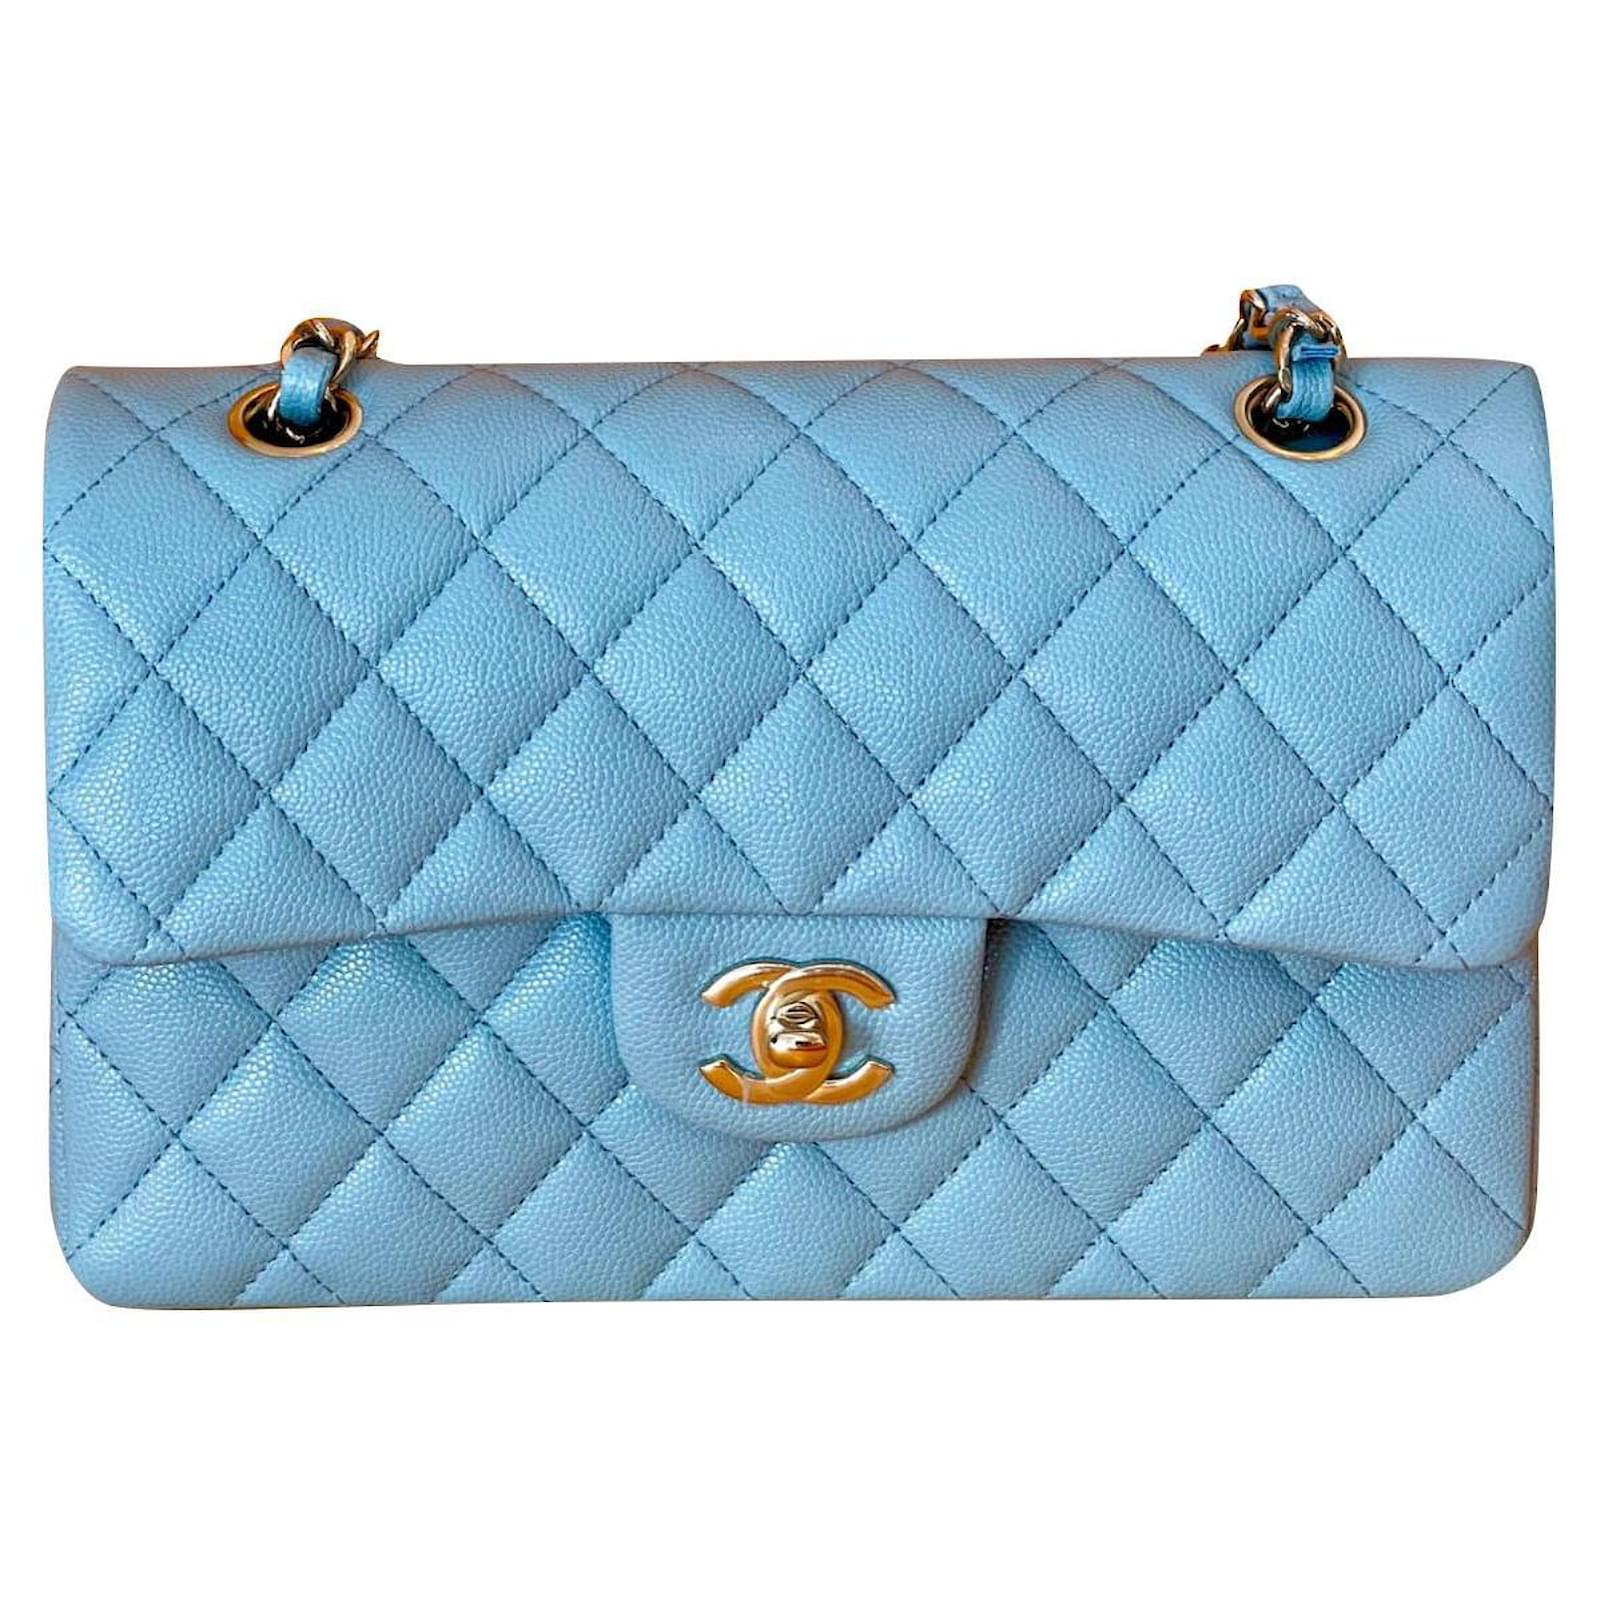 22S Chanel Classic lined Flap Caviar Leather Light Baby Blue.